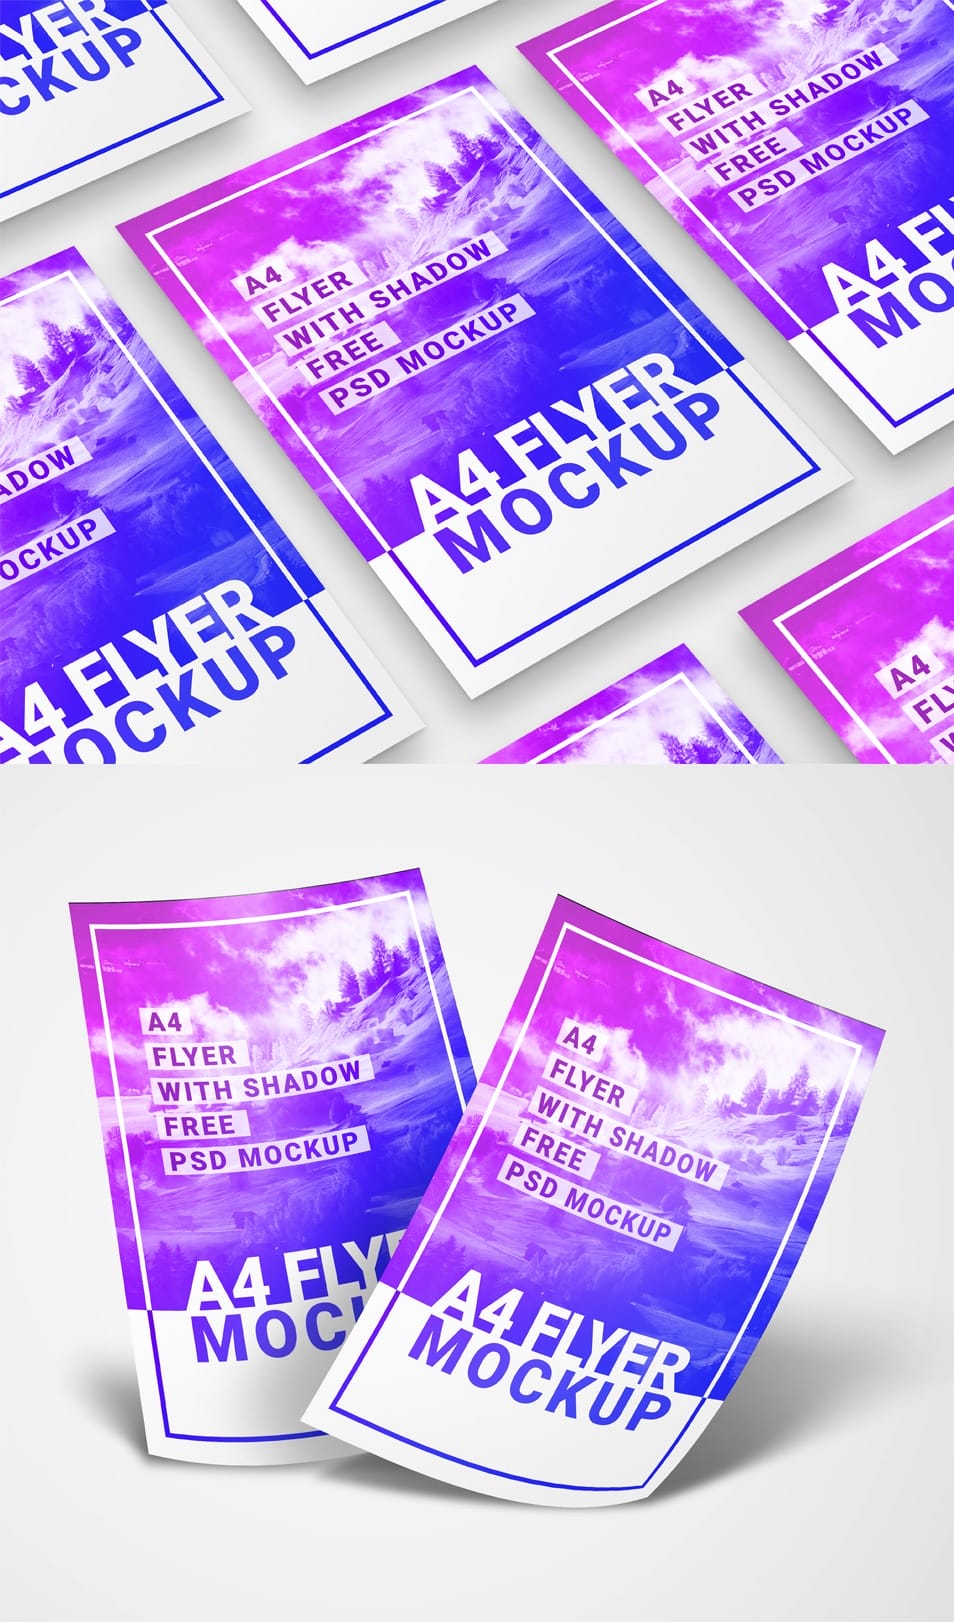 A4 Flyer With Shadow 2 Free PSD Mockups